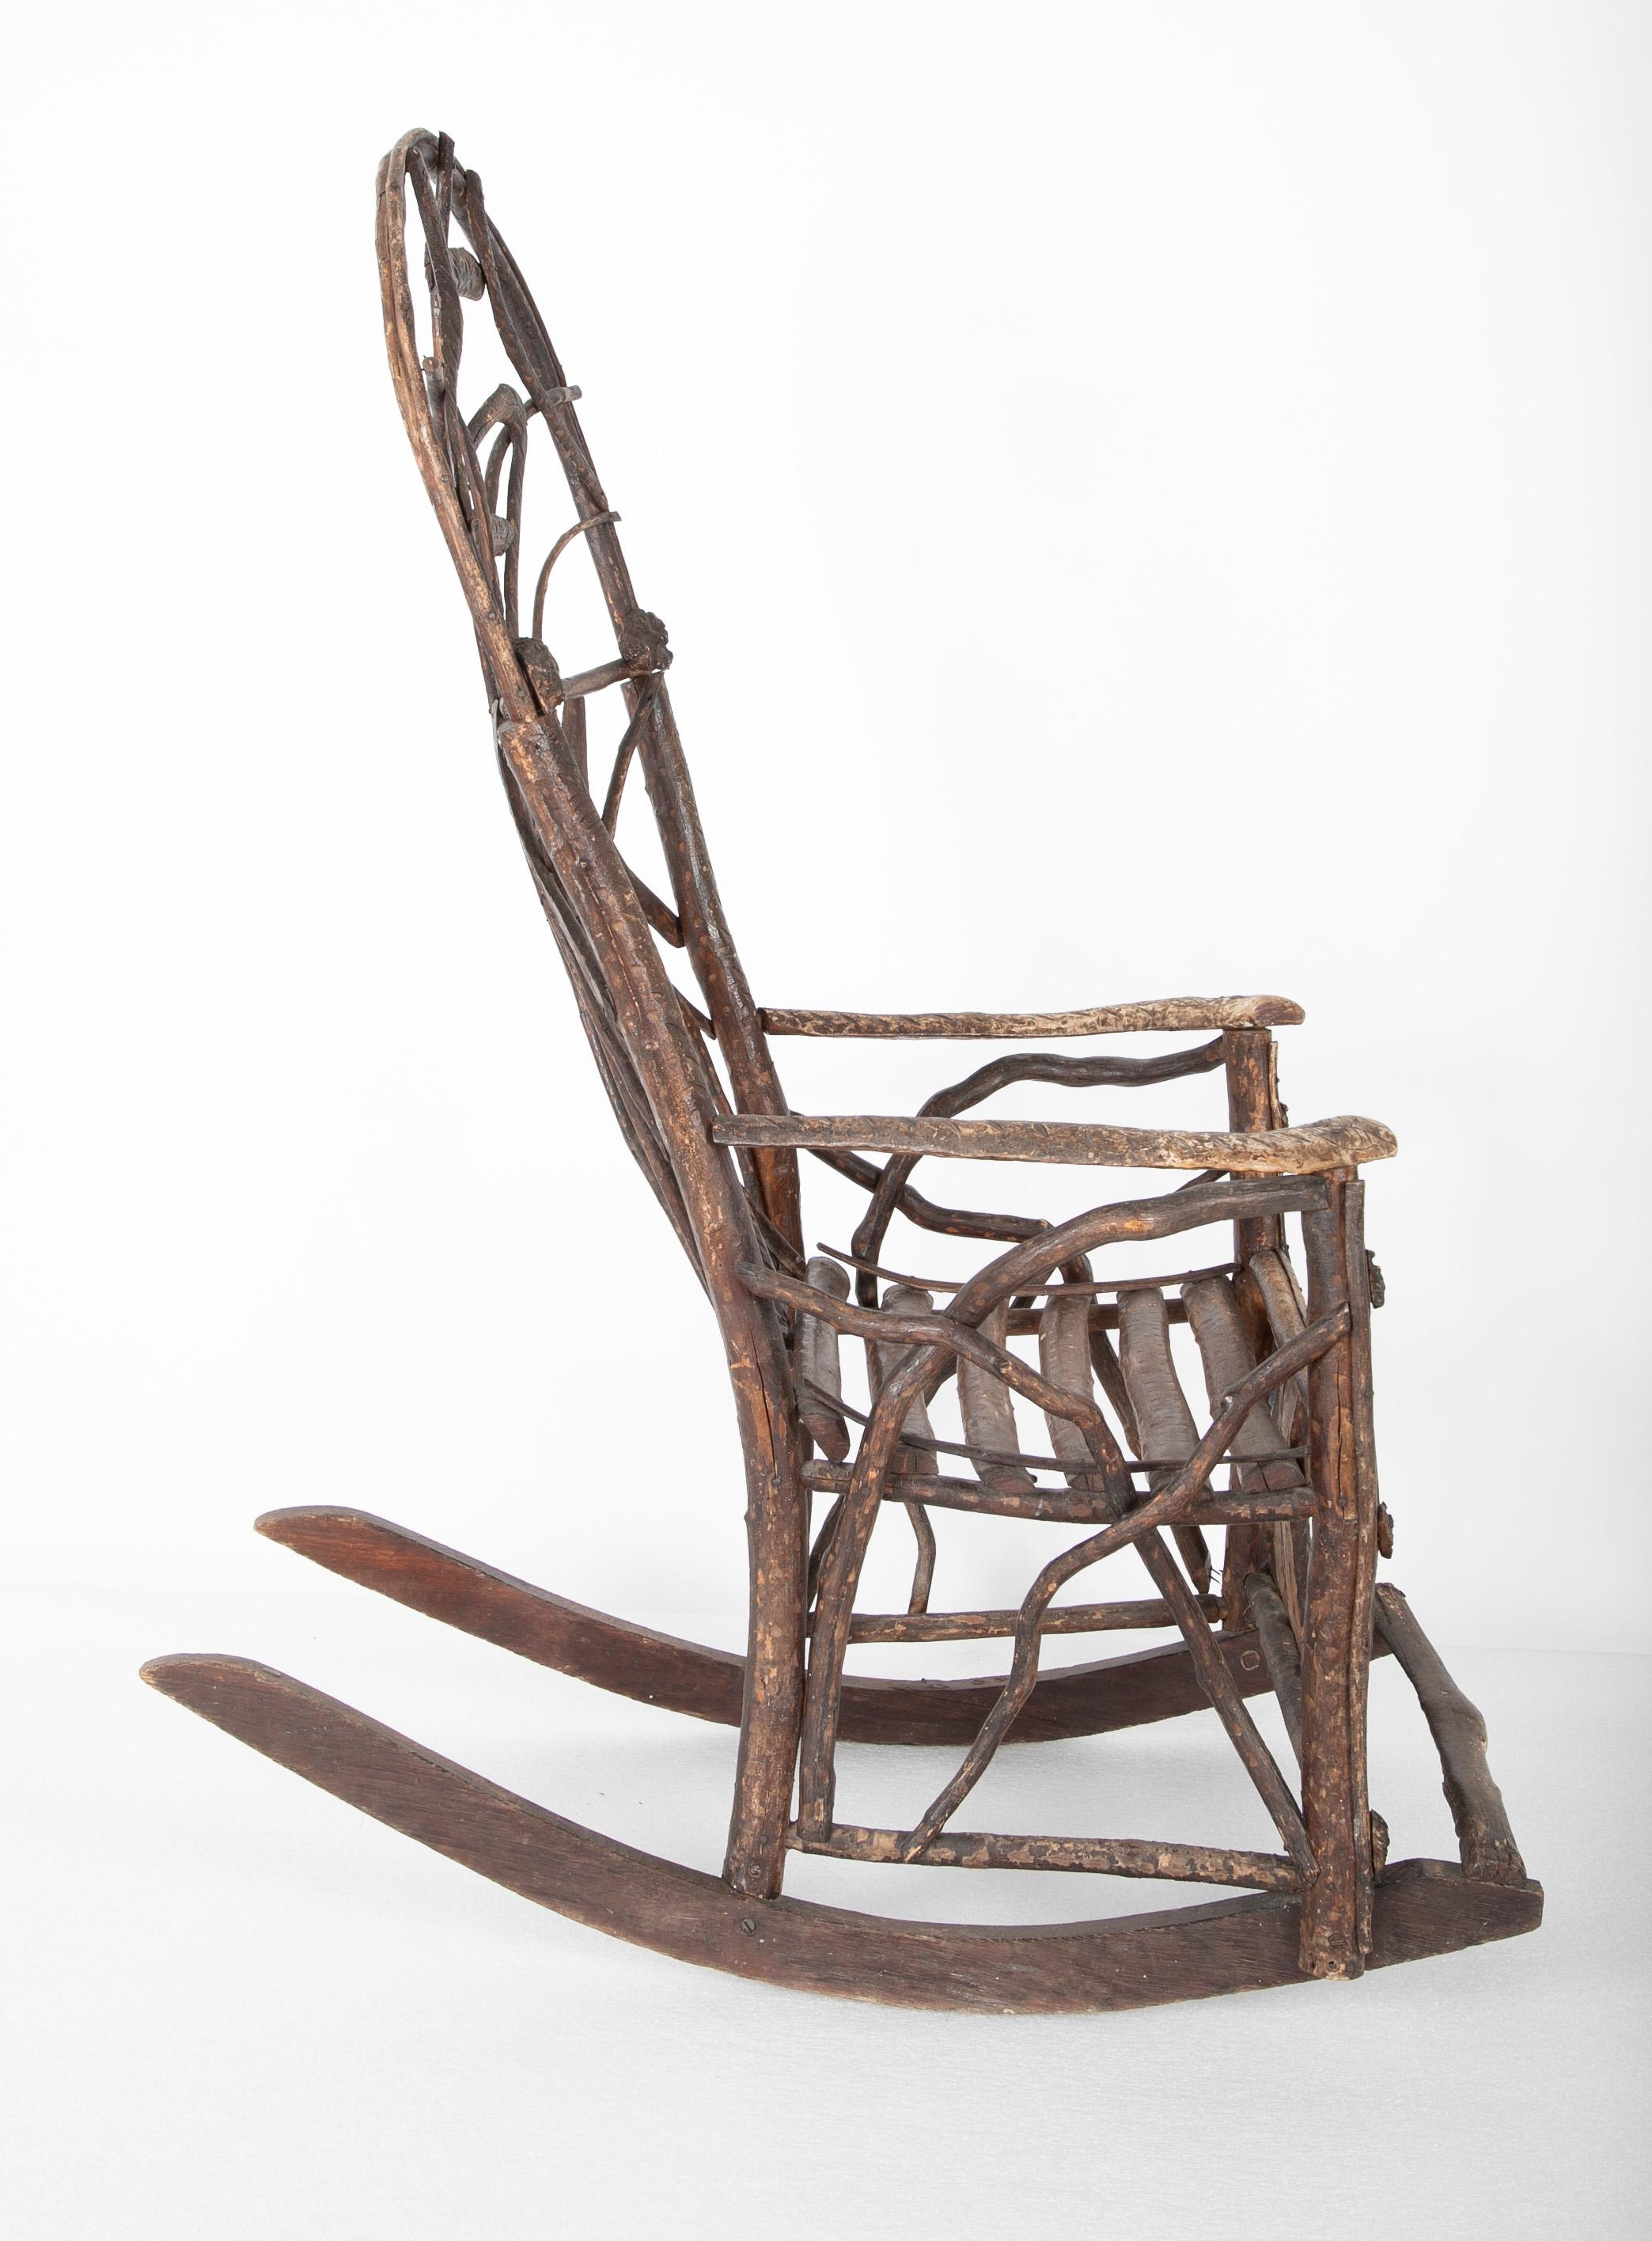 Rustic Rocking Chair Attributed to Rev. Ben Davis of Blowing Rock, NC 1